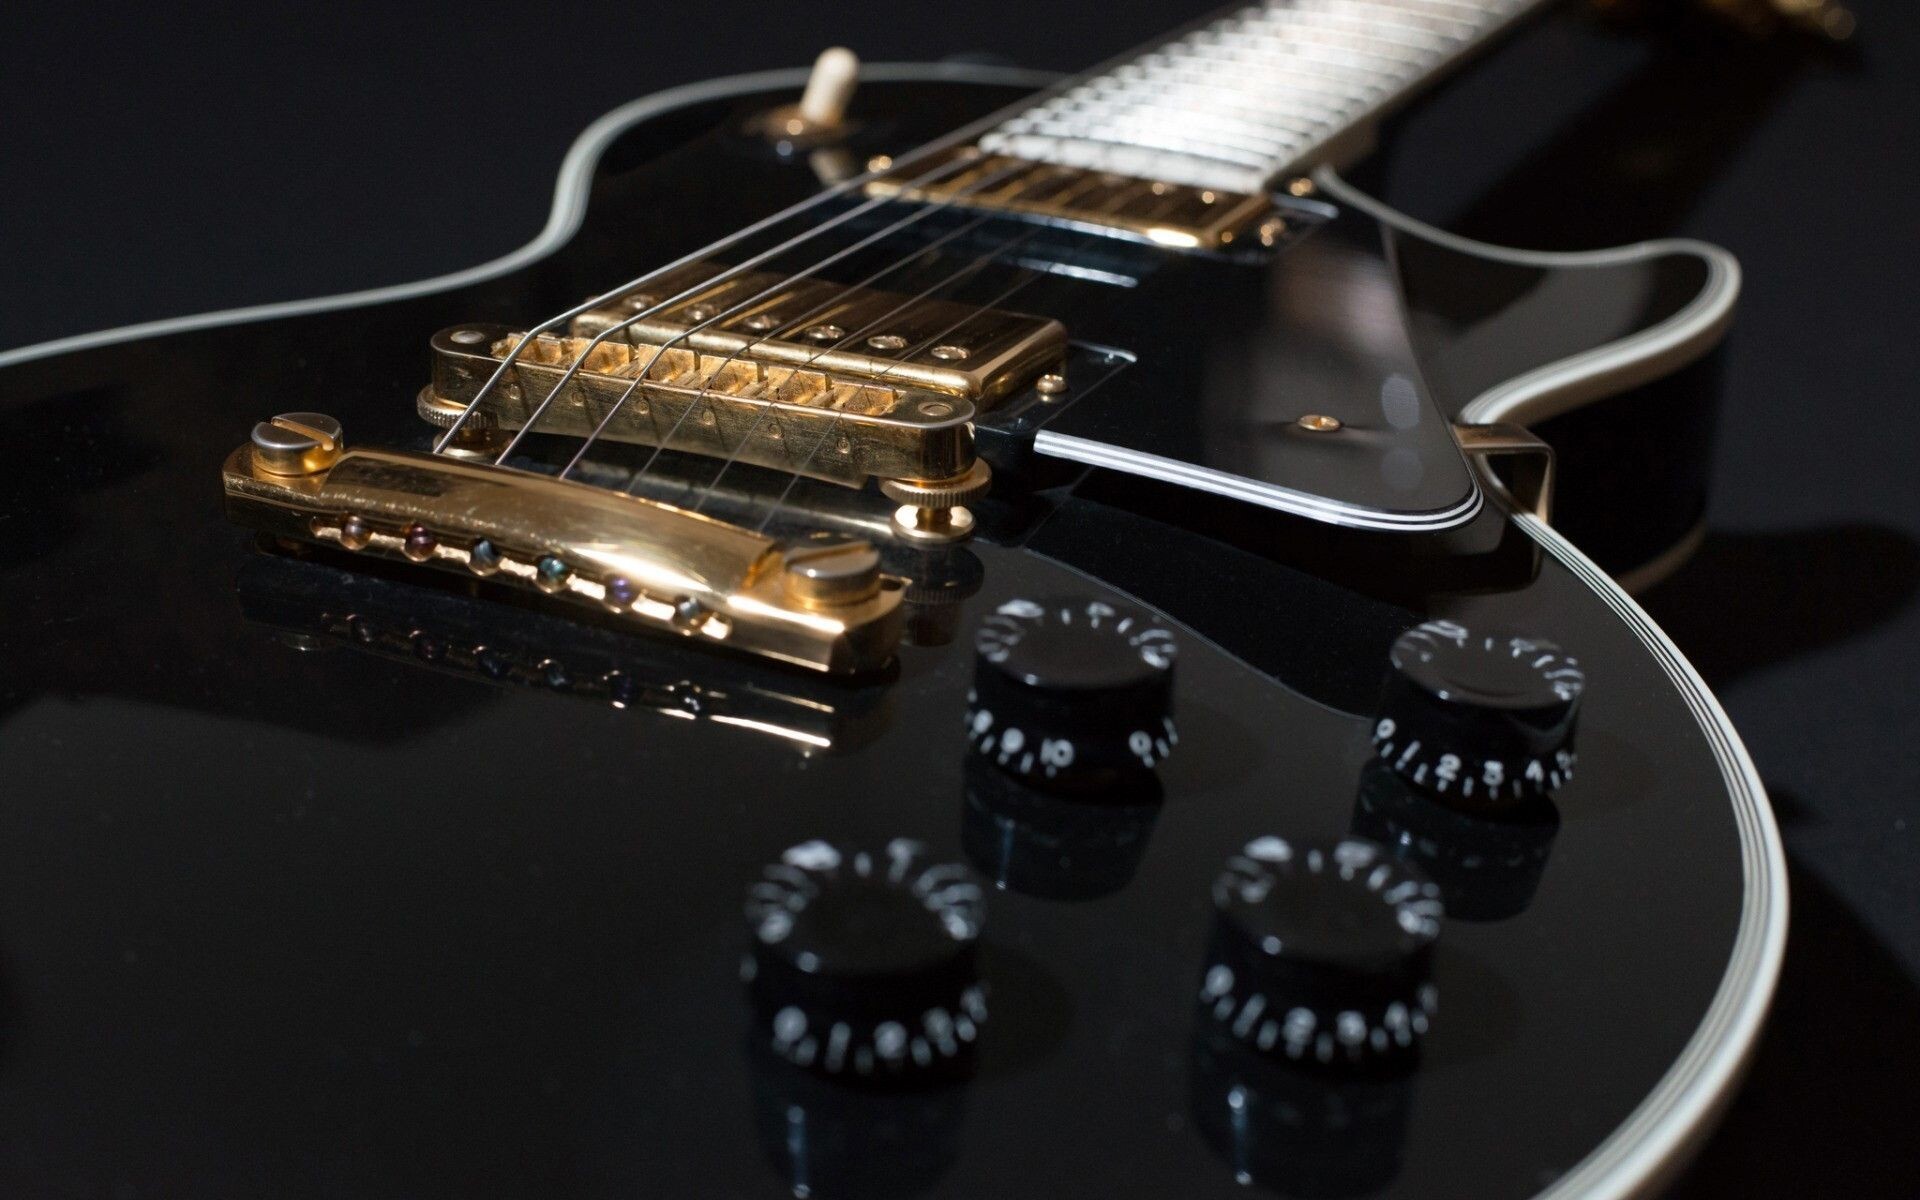 Gibson Guitar: The Joe Perry Boneyard Les Paul, An extremely rare musical instrument. 1920x1200 HD Background.